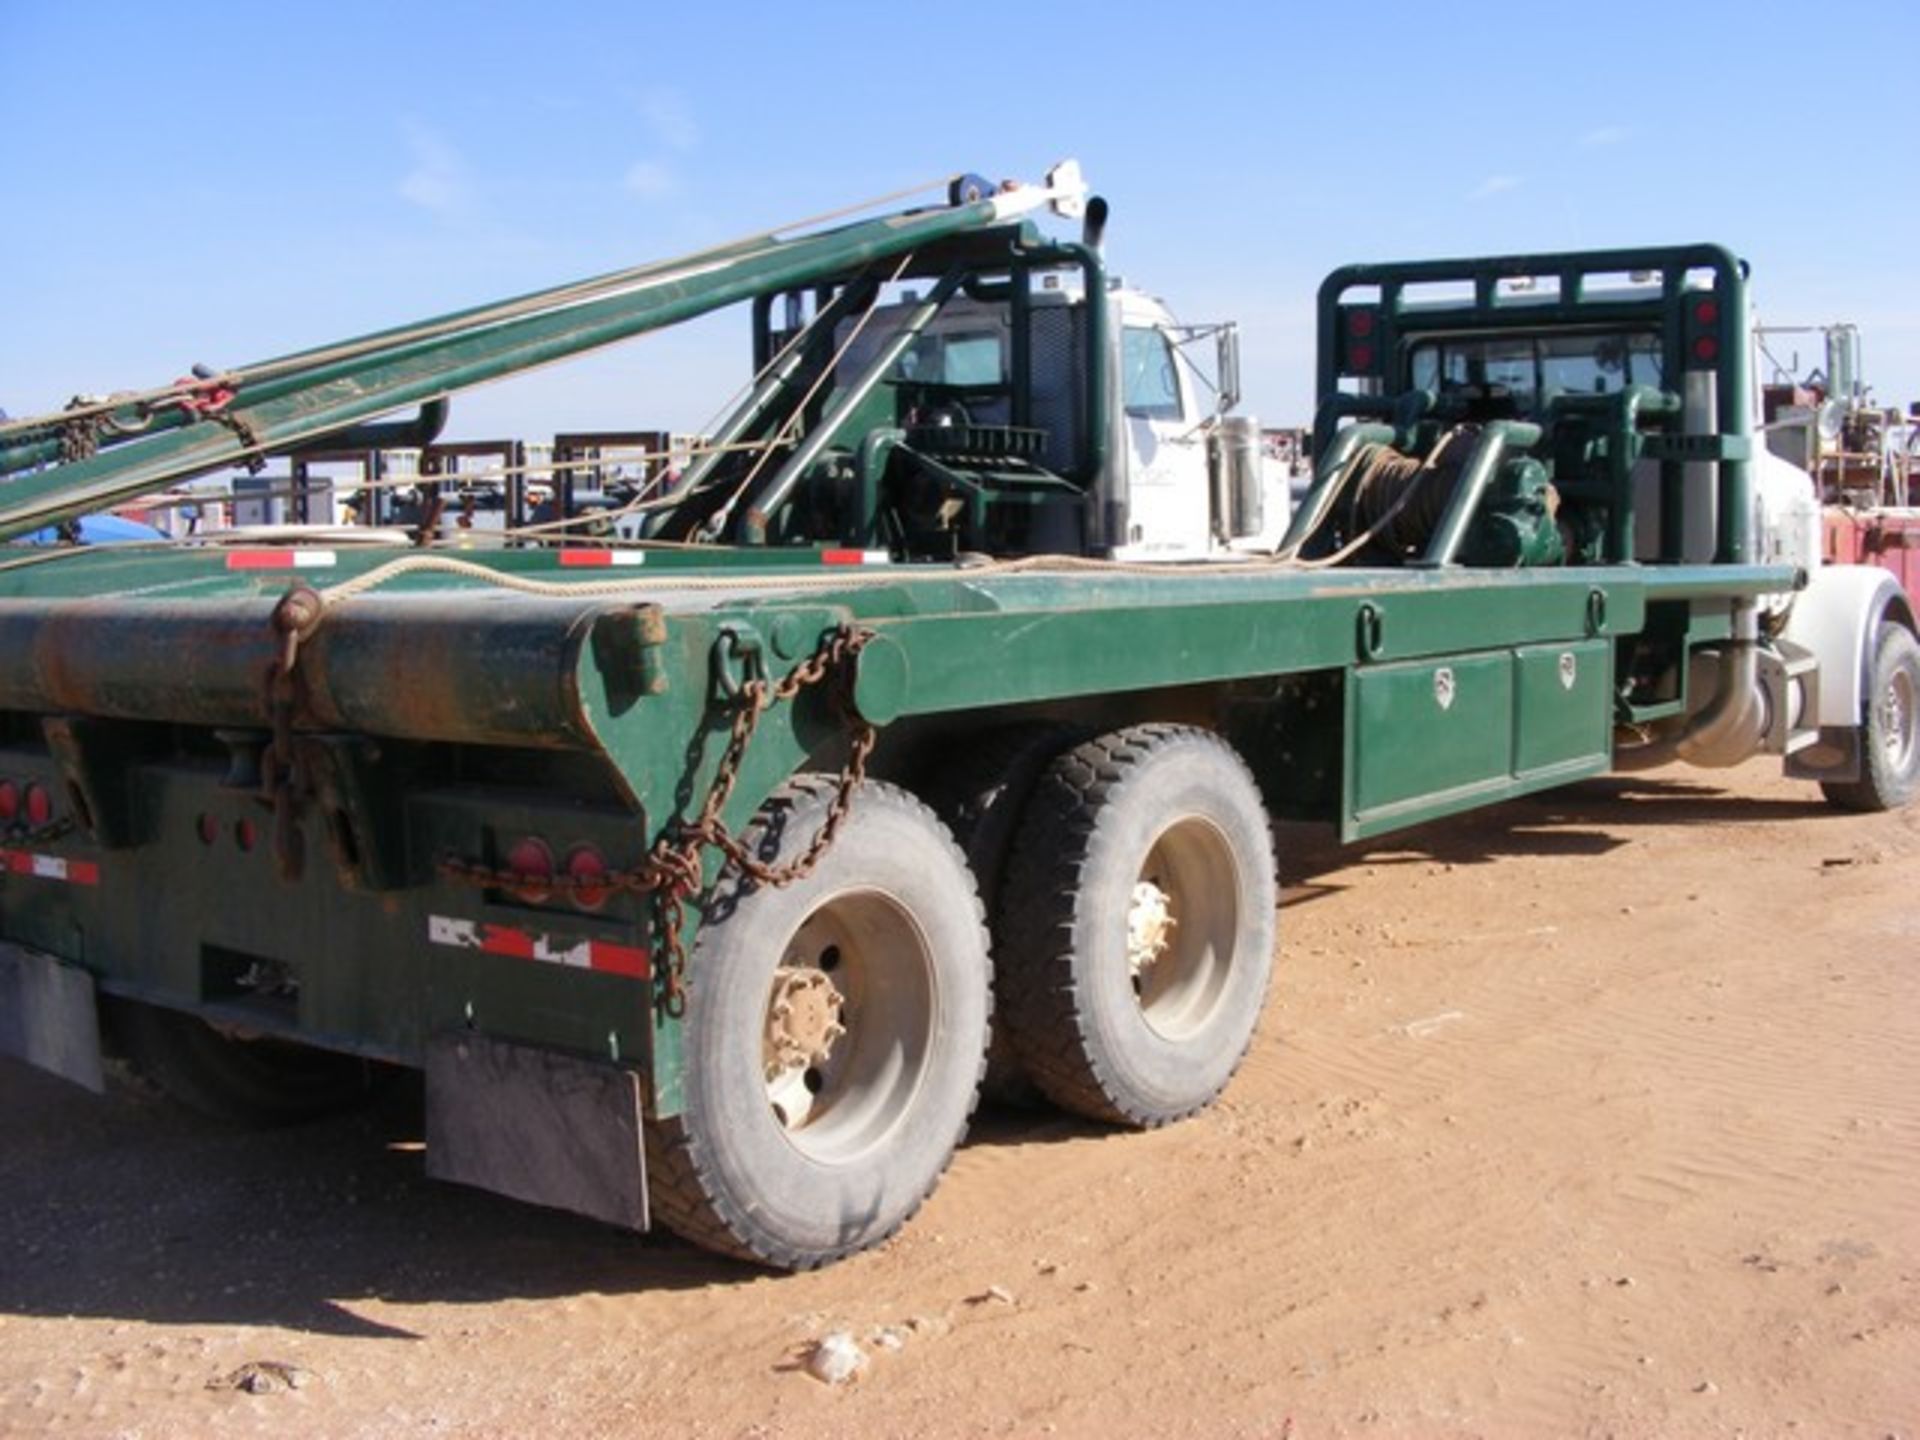 Located in YARD 1 - Midland, TX (6243) (X) 1996 PETERBILT 357 T/A GIN/ POLE TRUCK, VIN- - Image 3 of 8